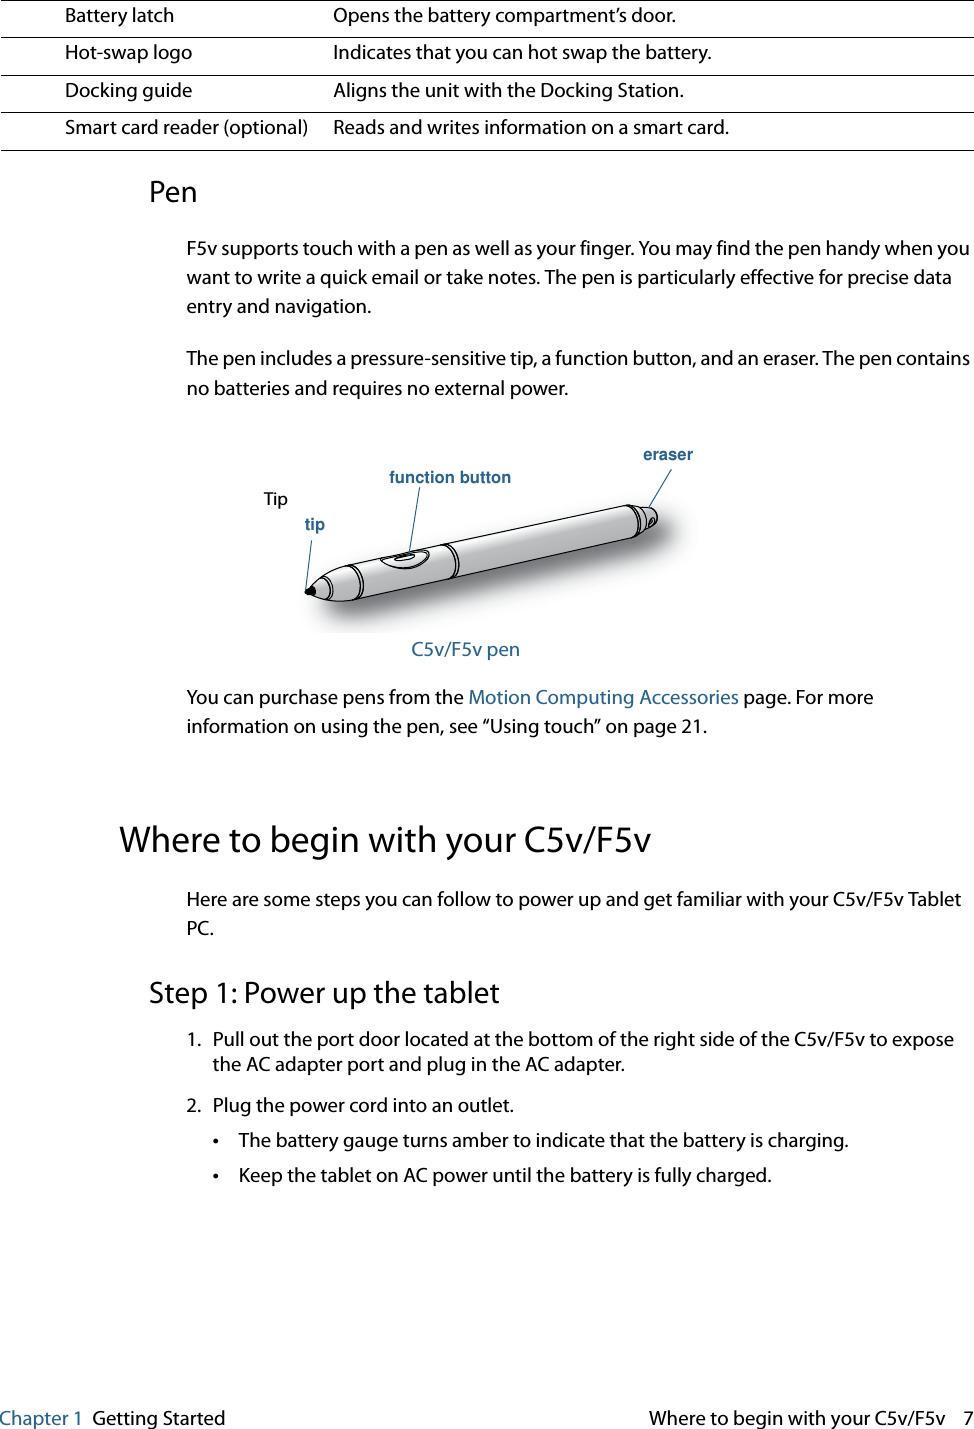 Chapter 1 Getting Started  Where to begin with your C5v/F5v    7PenF5v supports touch with a pen as well as your finger. You may find the pen handy when you want to write a quick email or take notes. The pen is particularly effective for precise data entry and navigation.The pen includes a pressure-sensitive tip, a function button, and an eraser. The pen contains no batteries and requires no external power.C5v/F5v penYou can purchase pens from the Motion Computing Accessories page. For more information on using the pen, see “Using touch” on page 21.Where to begin with your C5v/F5vHere are some steps you can follow to power up and get familiar with your C5v/F5v Tablet PC.Step 1: Power up the tablet 1. Pull out the port door located at the bottom of the right side of the C5v/F5v to expose the AC adapter port and plug in the AC adapter.2. Plug the power cord into an outlet.•The battery gauge turns amber to indicate that the battery is charging. •Keep the tablet on AC power until the battery is fully charged.Battery latch Opens the battery compartment’s door.Hot-swap logo Indicates that you can hot swap the battery.Docking guide Aligns the unit with the Docking Station.Smart card reader (optional) Reads and writes information on a smart card.Tipfunction buttoneraser  tip